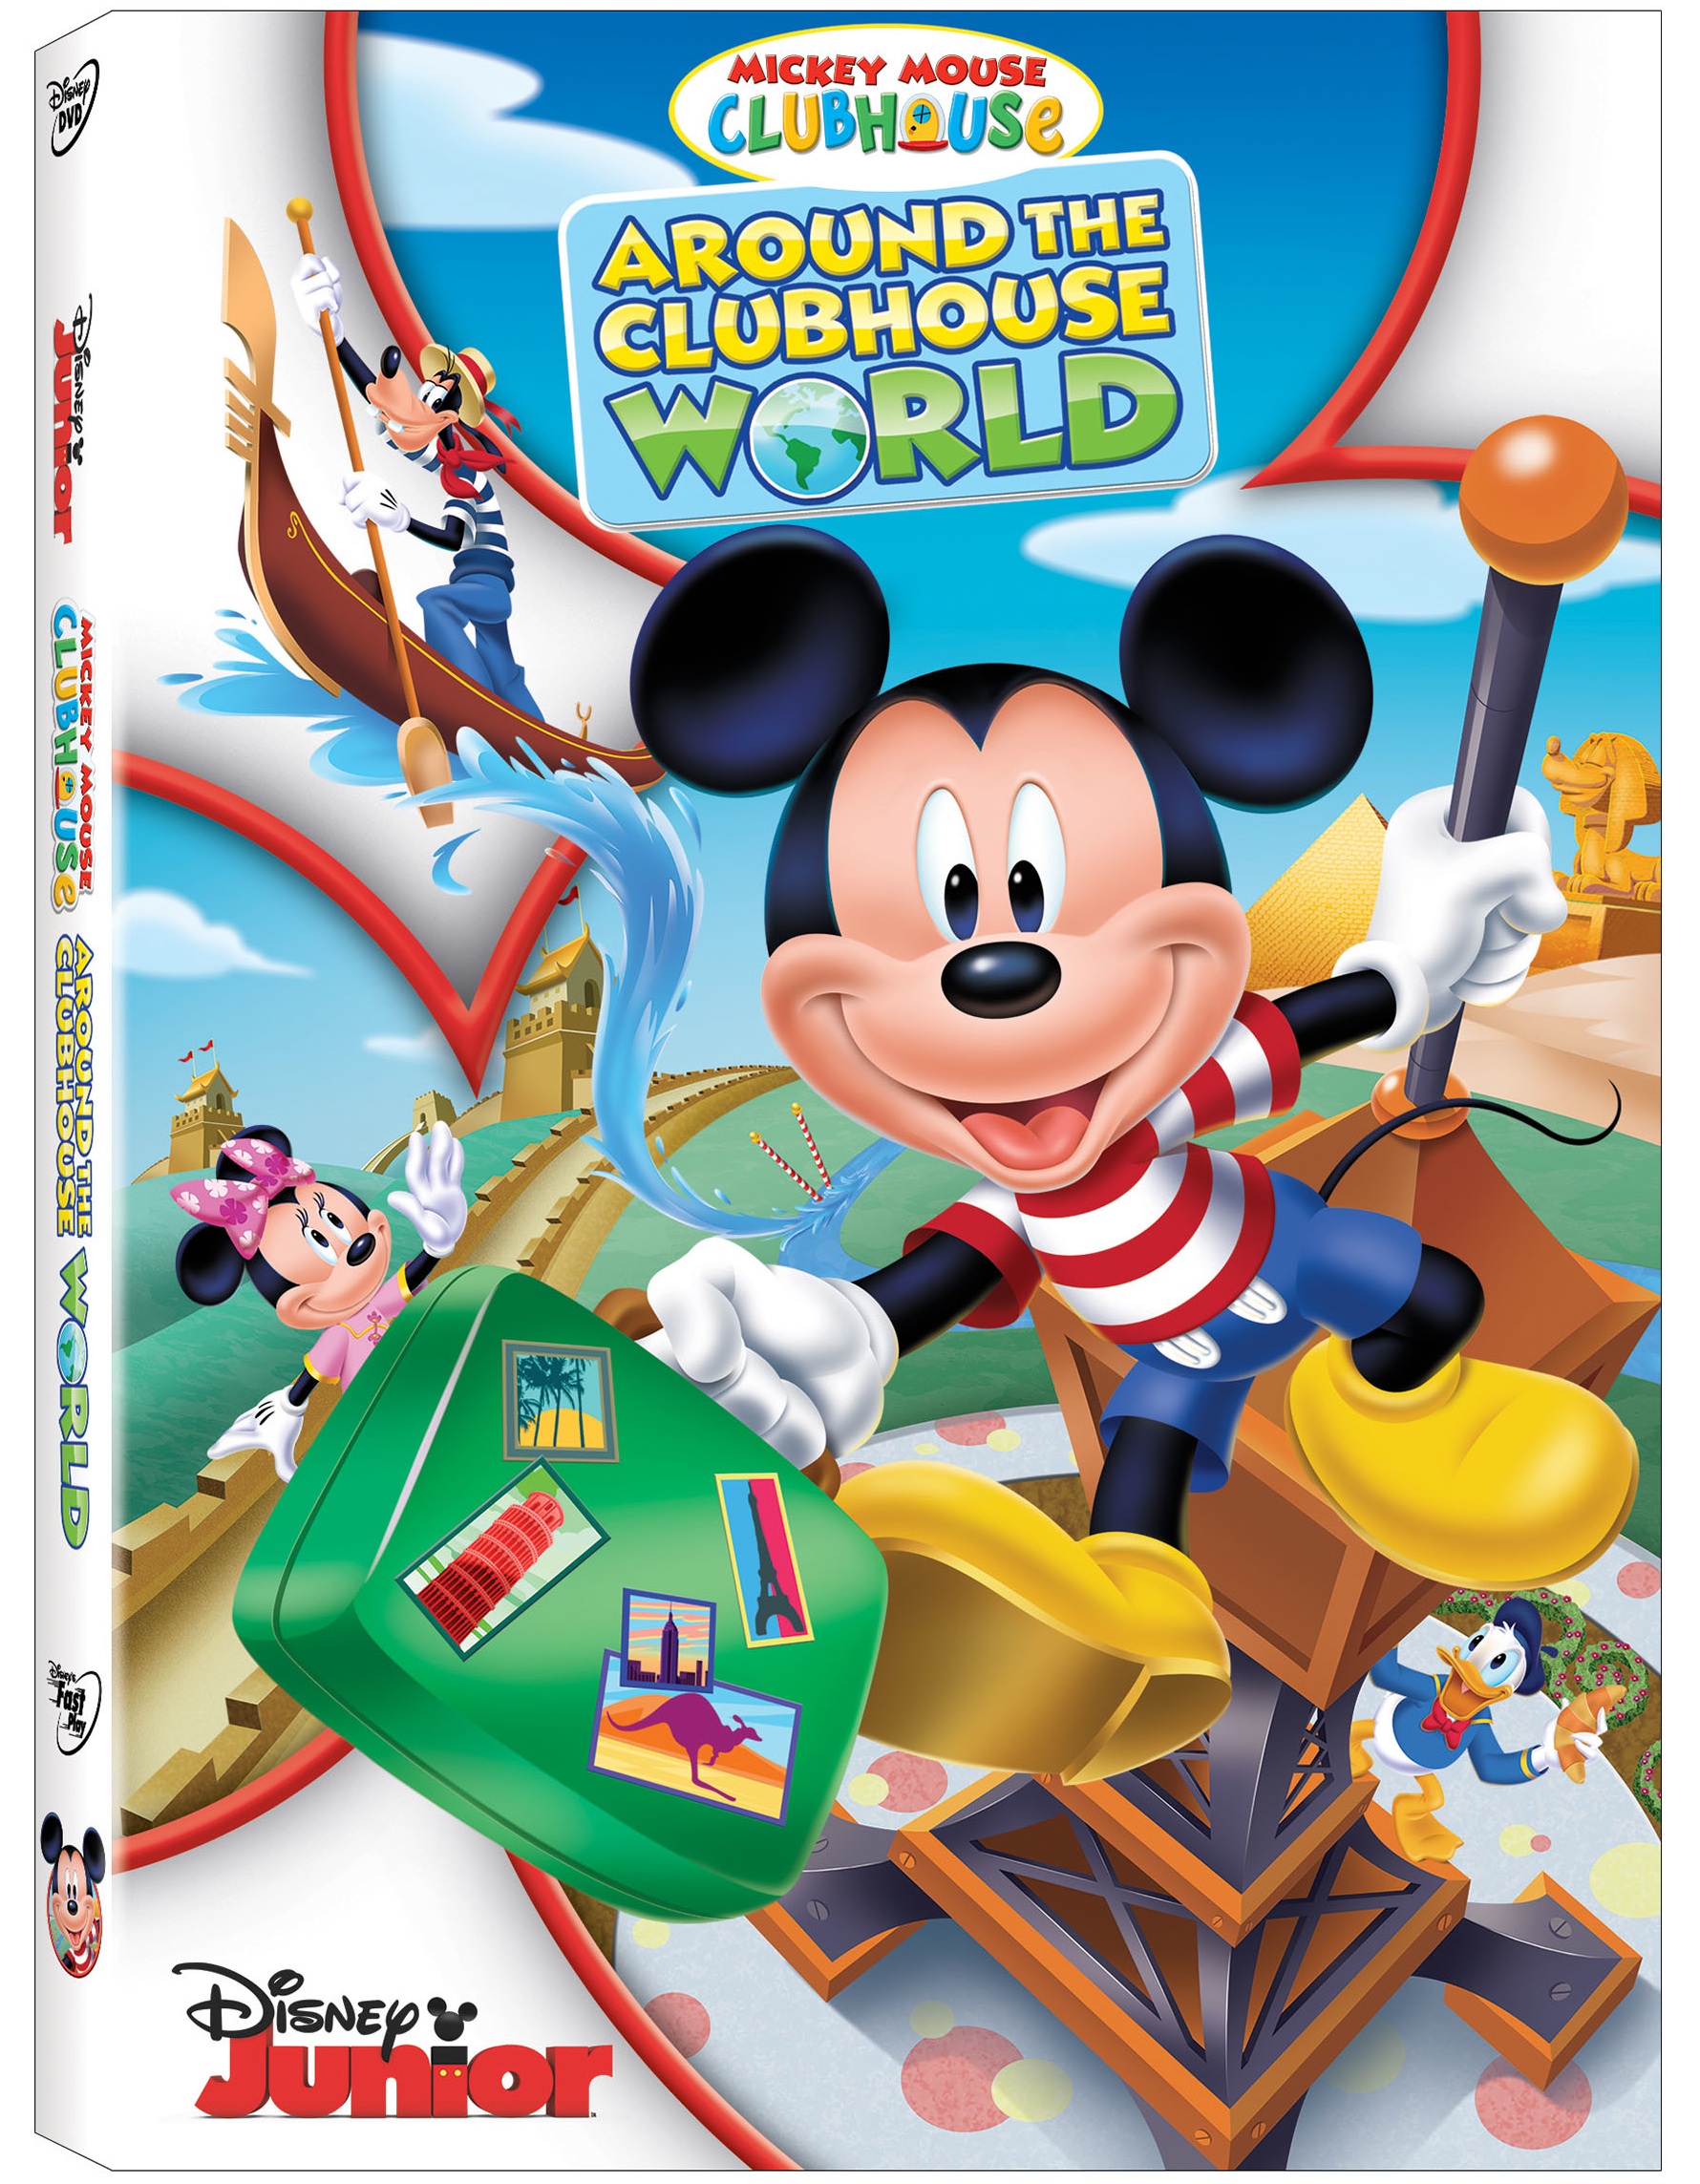 Mickey Mouse Clubhouse: Around the Clubhouse World DVD Review & Giveaway (ends 5/31)